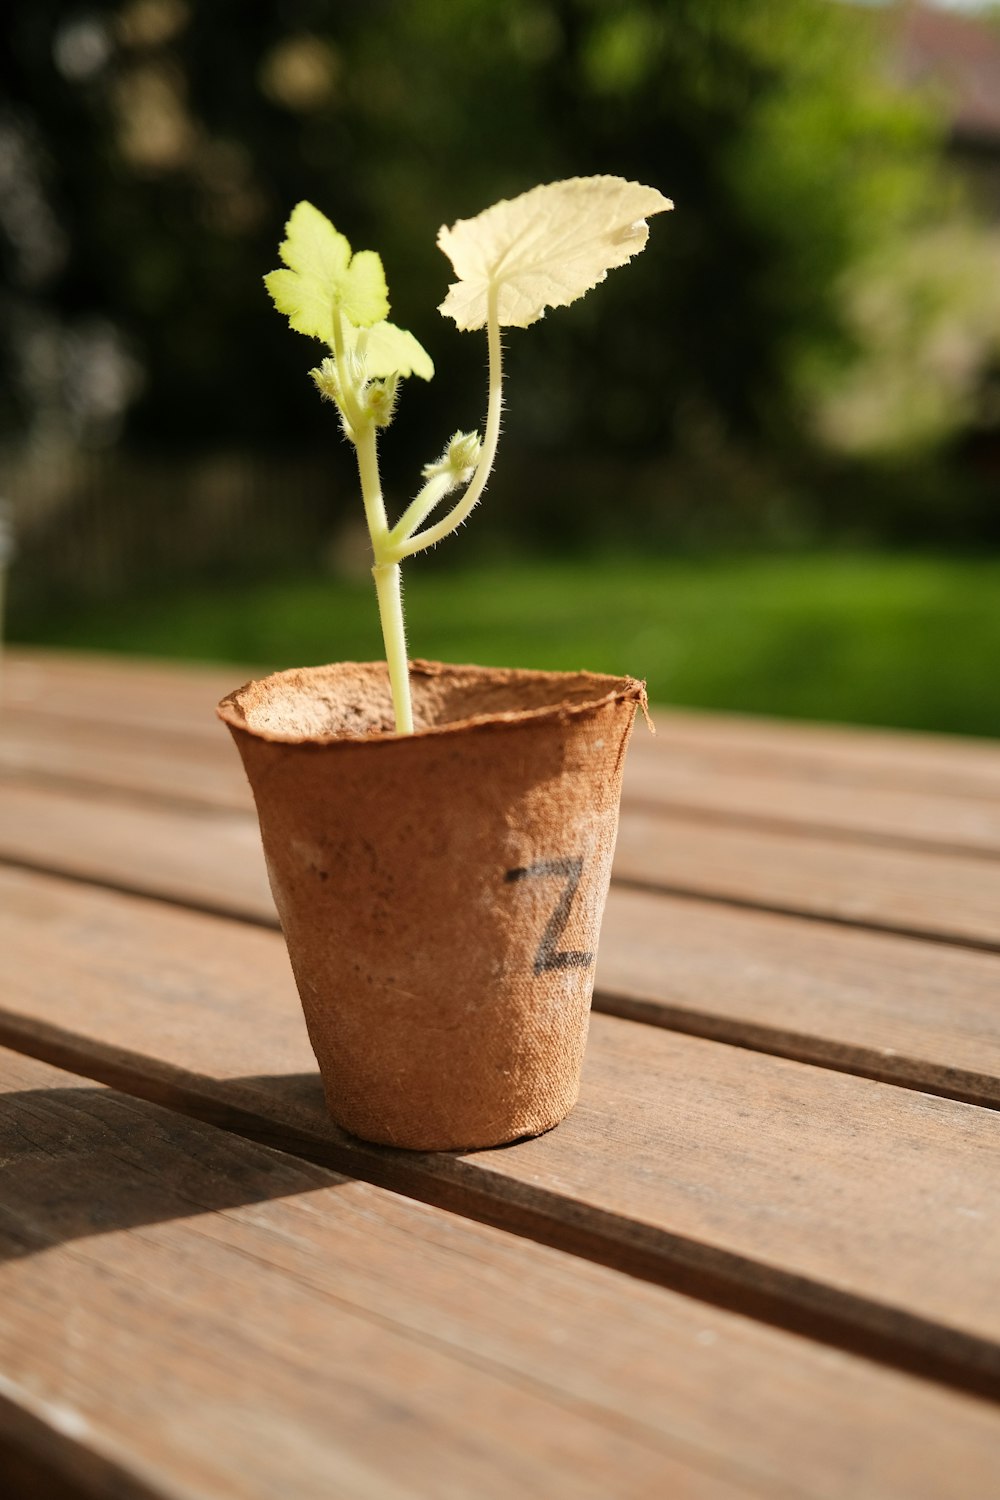 a small plant in a pot on a wooden table